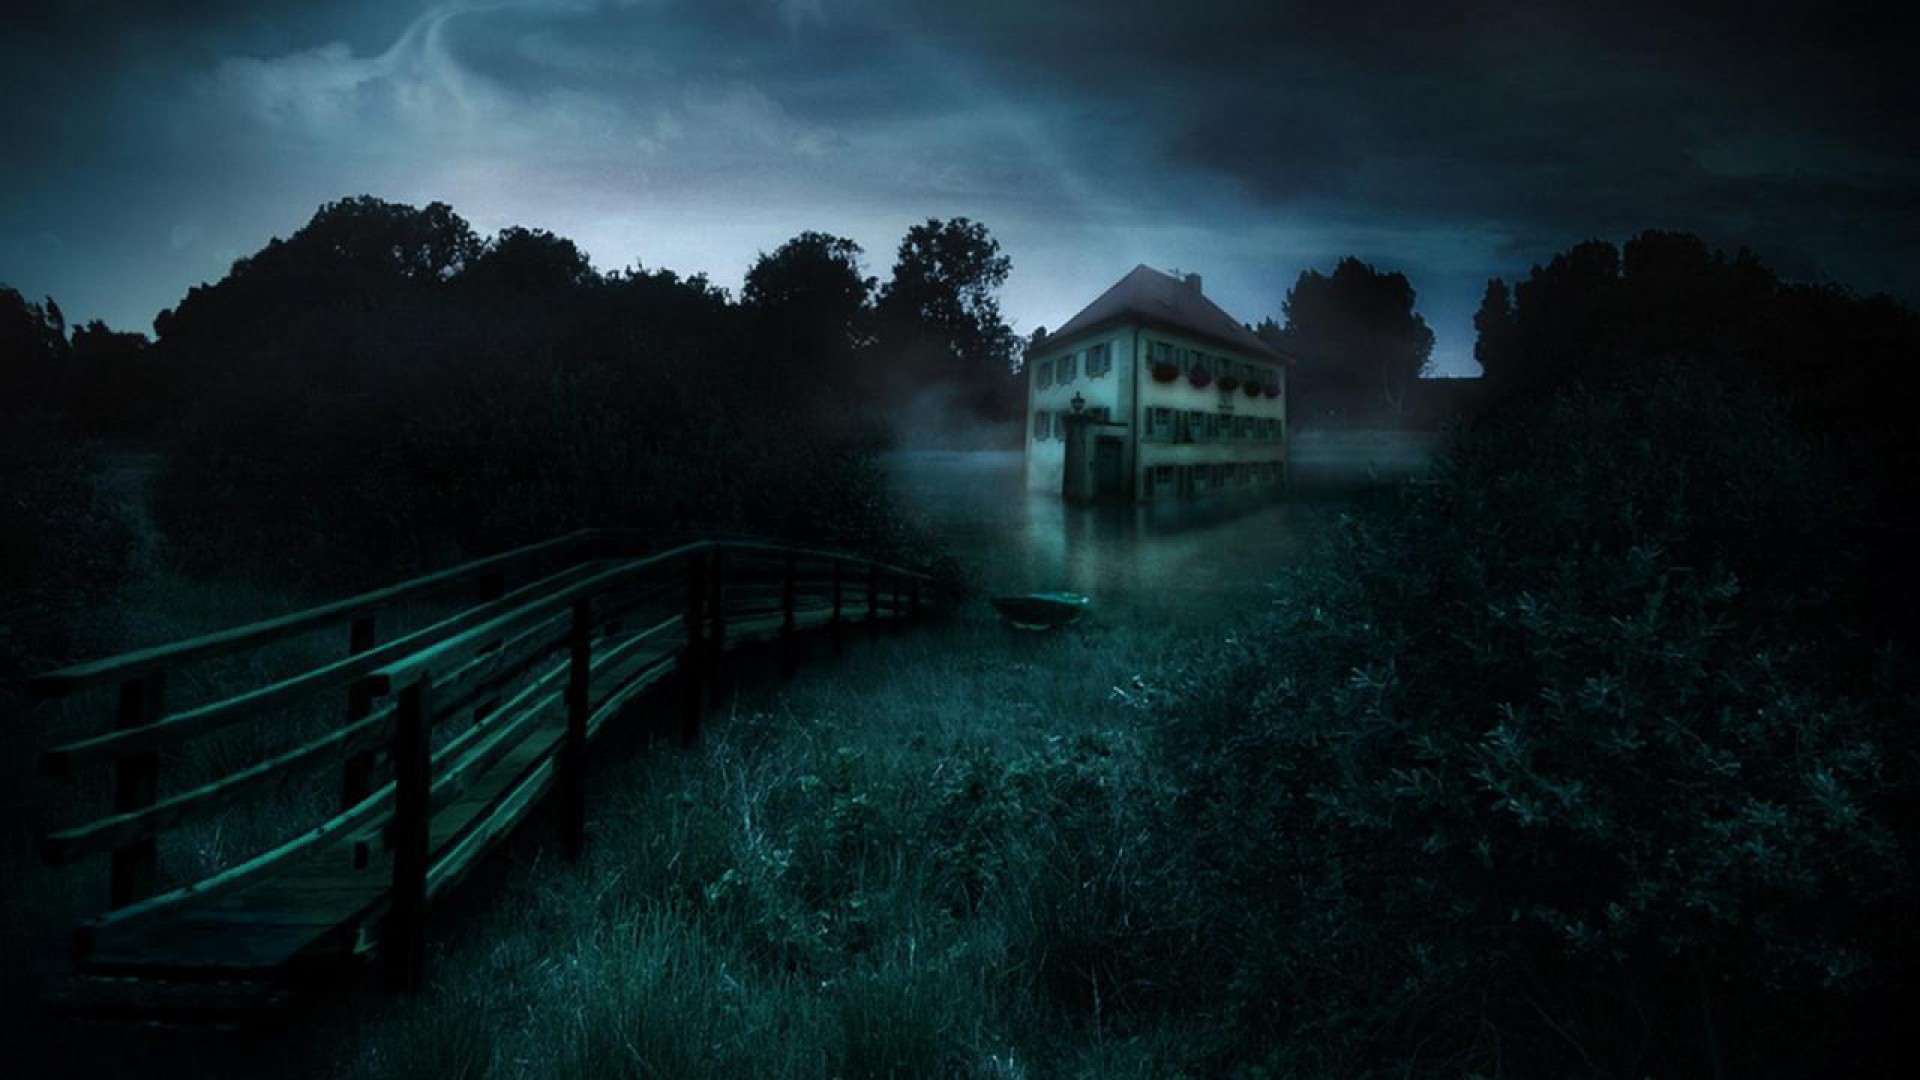 Dark Scary Wallpapers HD | Wallpapers, Backgrounds, Images, Art ...